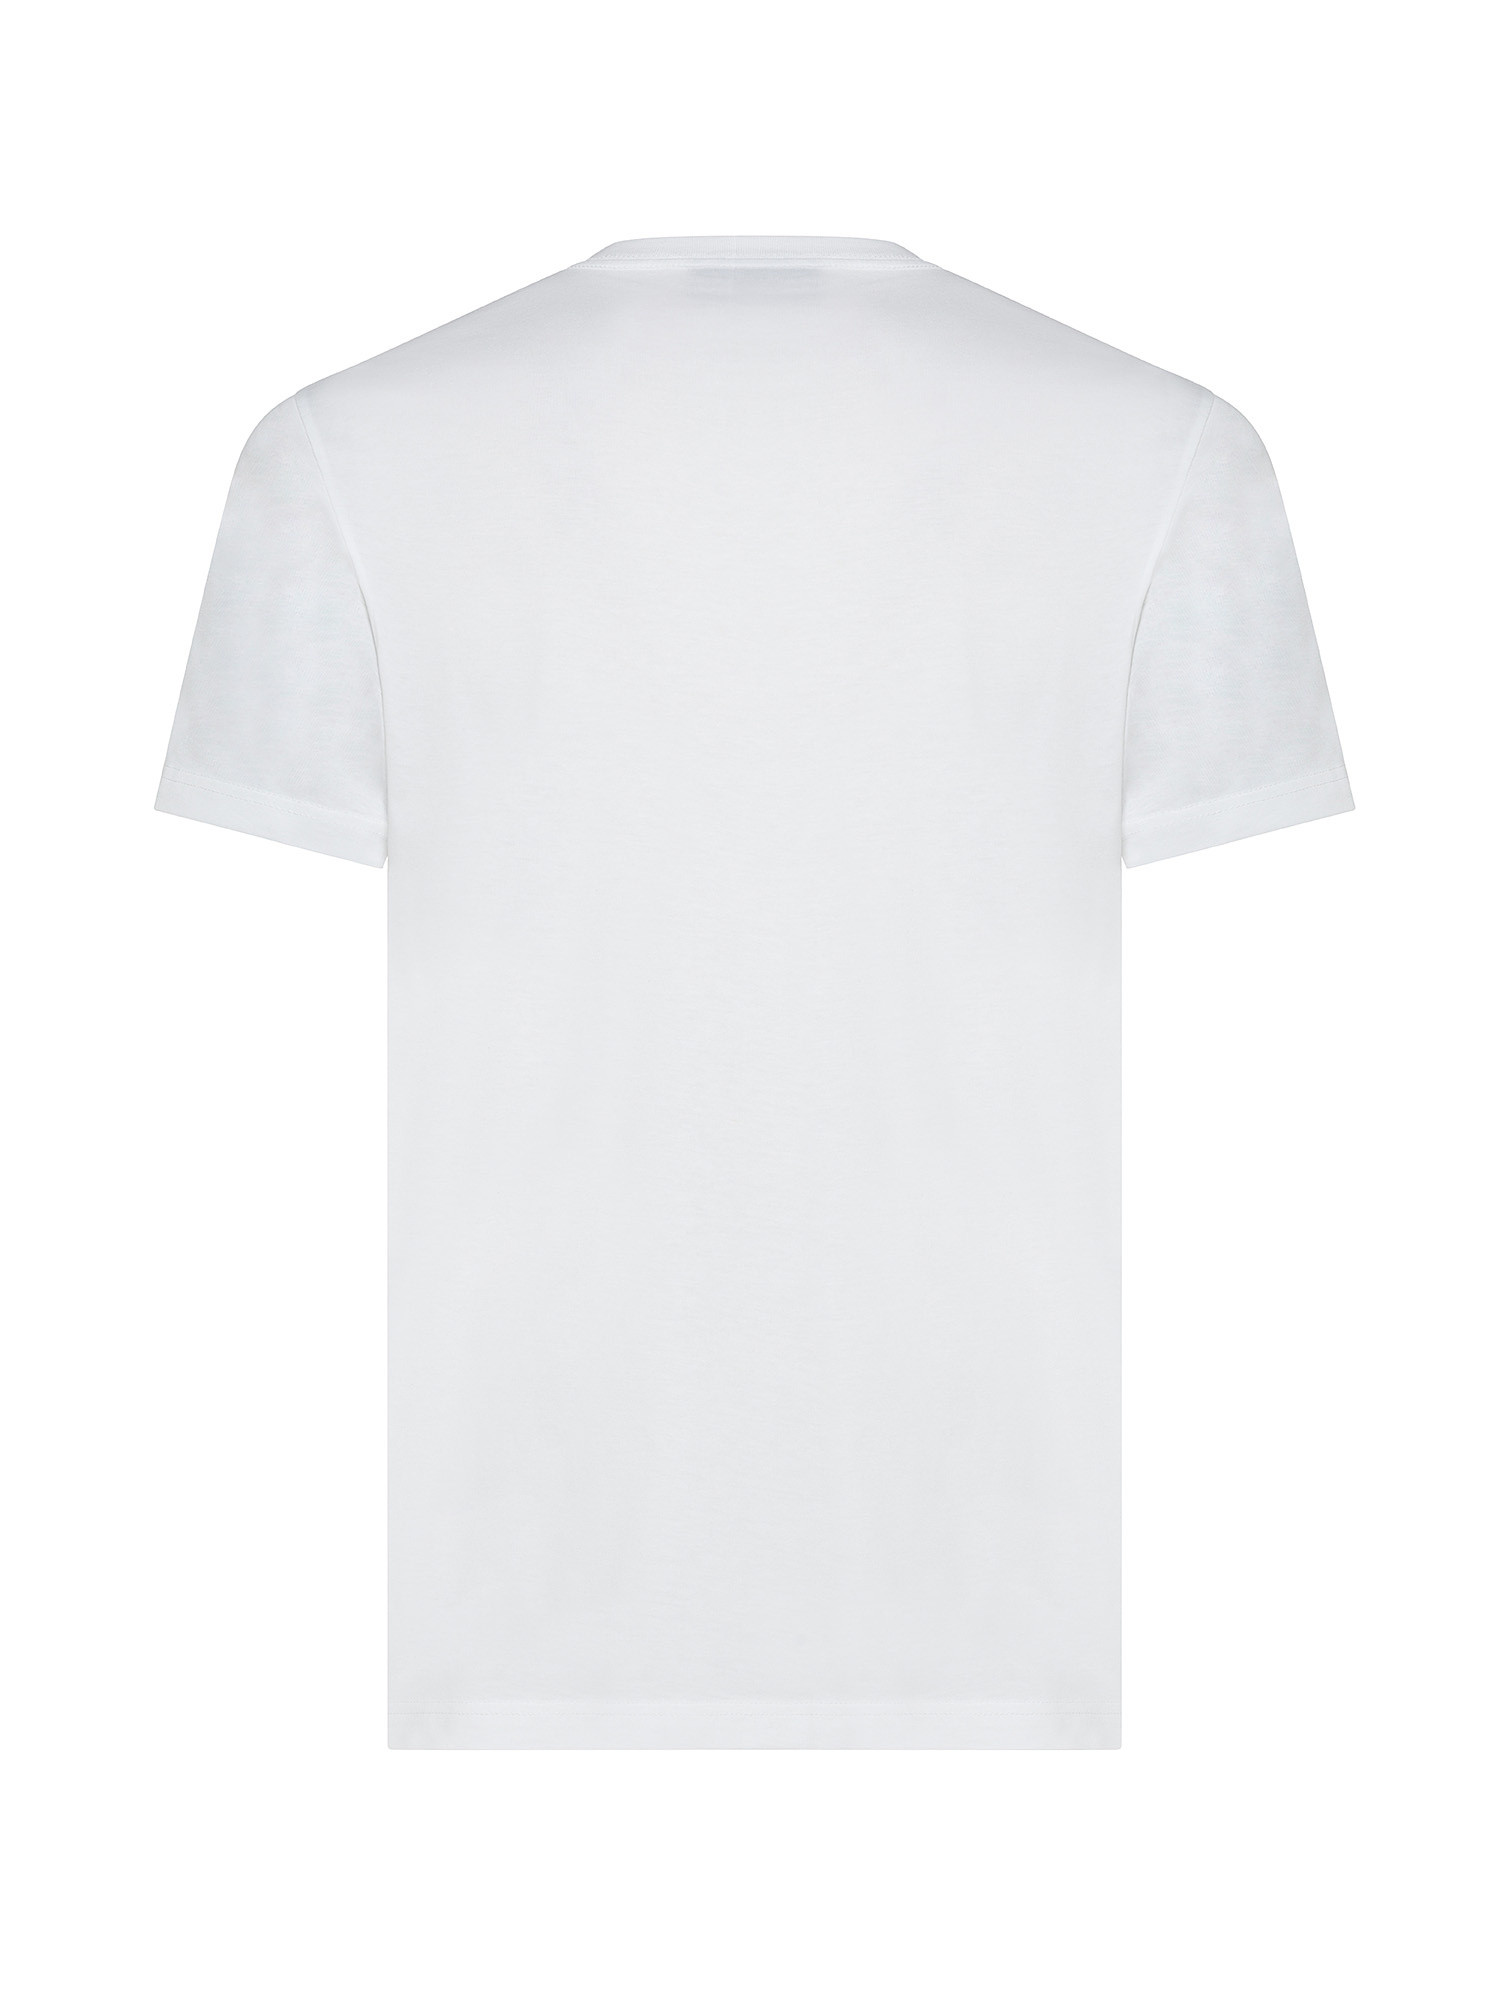 Paul Smith - Slim fit cotton T-shirt with rabbit print, White, large image number 1